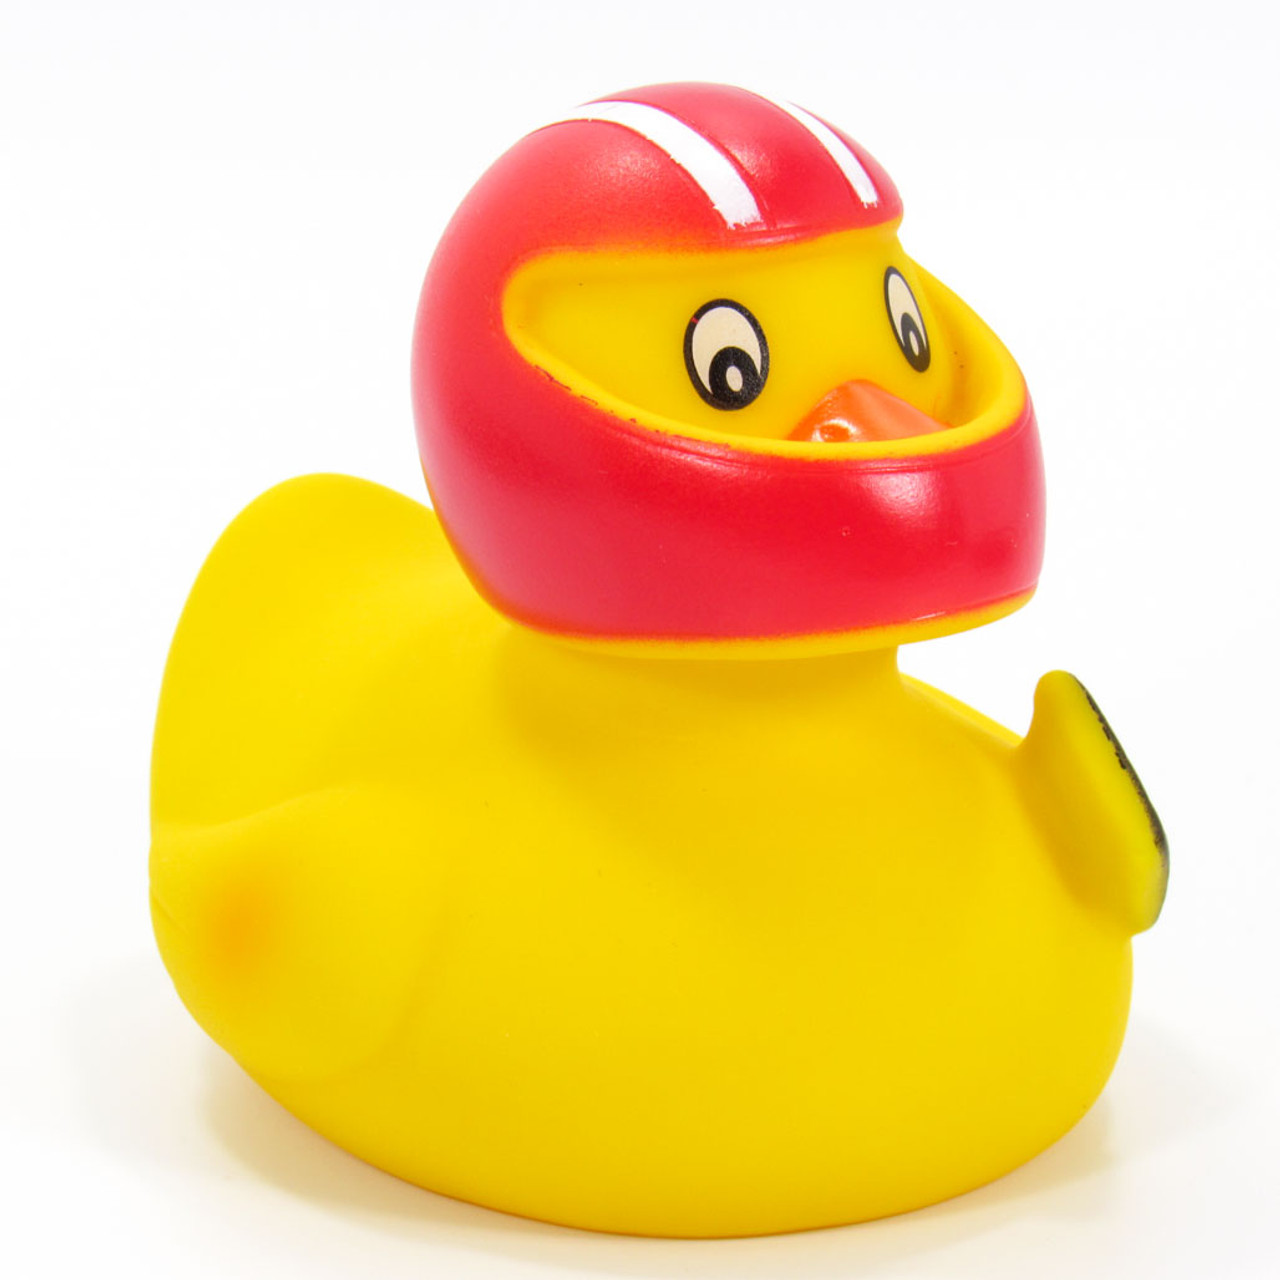 Ducks in the Window  Over 1000 styles of Rubber Ducks to match most any  personality, occupation, or favorite pastime!